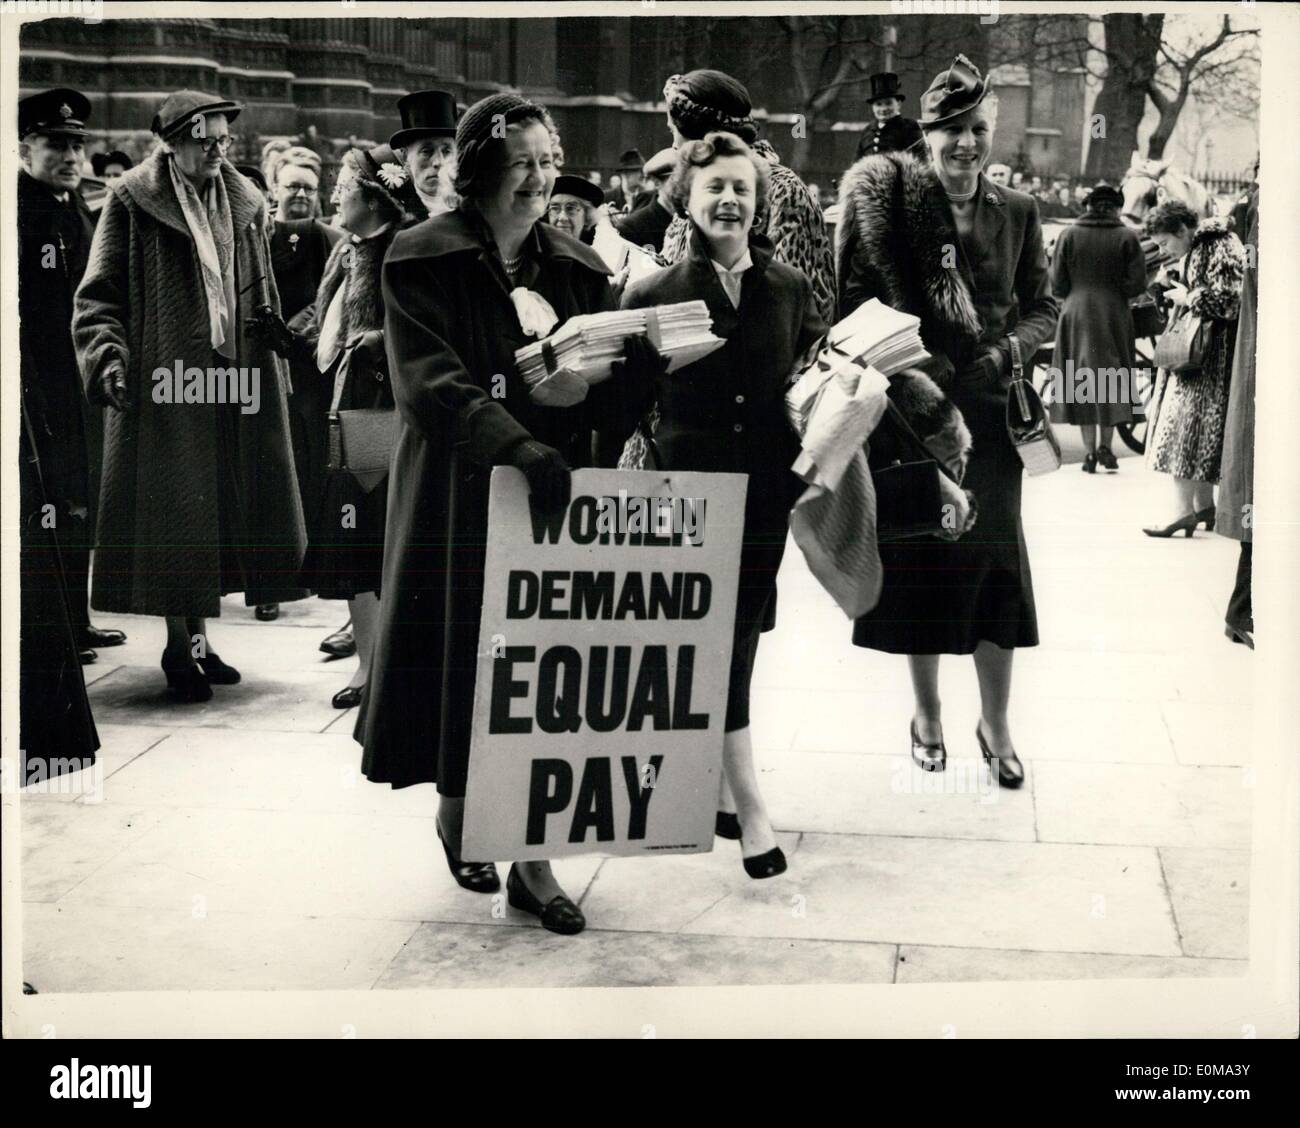 Mar. 08, 1954 - Equal Pay Campaign Committee Visits House Of Commons.: Membera of the Equal Pay Campaign Committee visited the House of Commons this afternoon with a petition signed by eighty thousand. They travelled in horse drawn carriages - including the one that Queen Salote used at the Coronation. Photo shows Arriving with the Petition this afternoon are L-R:- Miss Irene Ward (M.P. Tynemouth); Mrs. Barbara Catle M.P. Blackburn; Mrs. Patricia Ford M.P. Co. Down. N. Ireland (looking back) and Dr. Edith Summerskill M.P. Fulham. Stock Photo